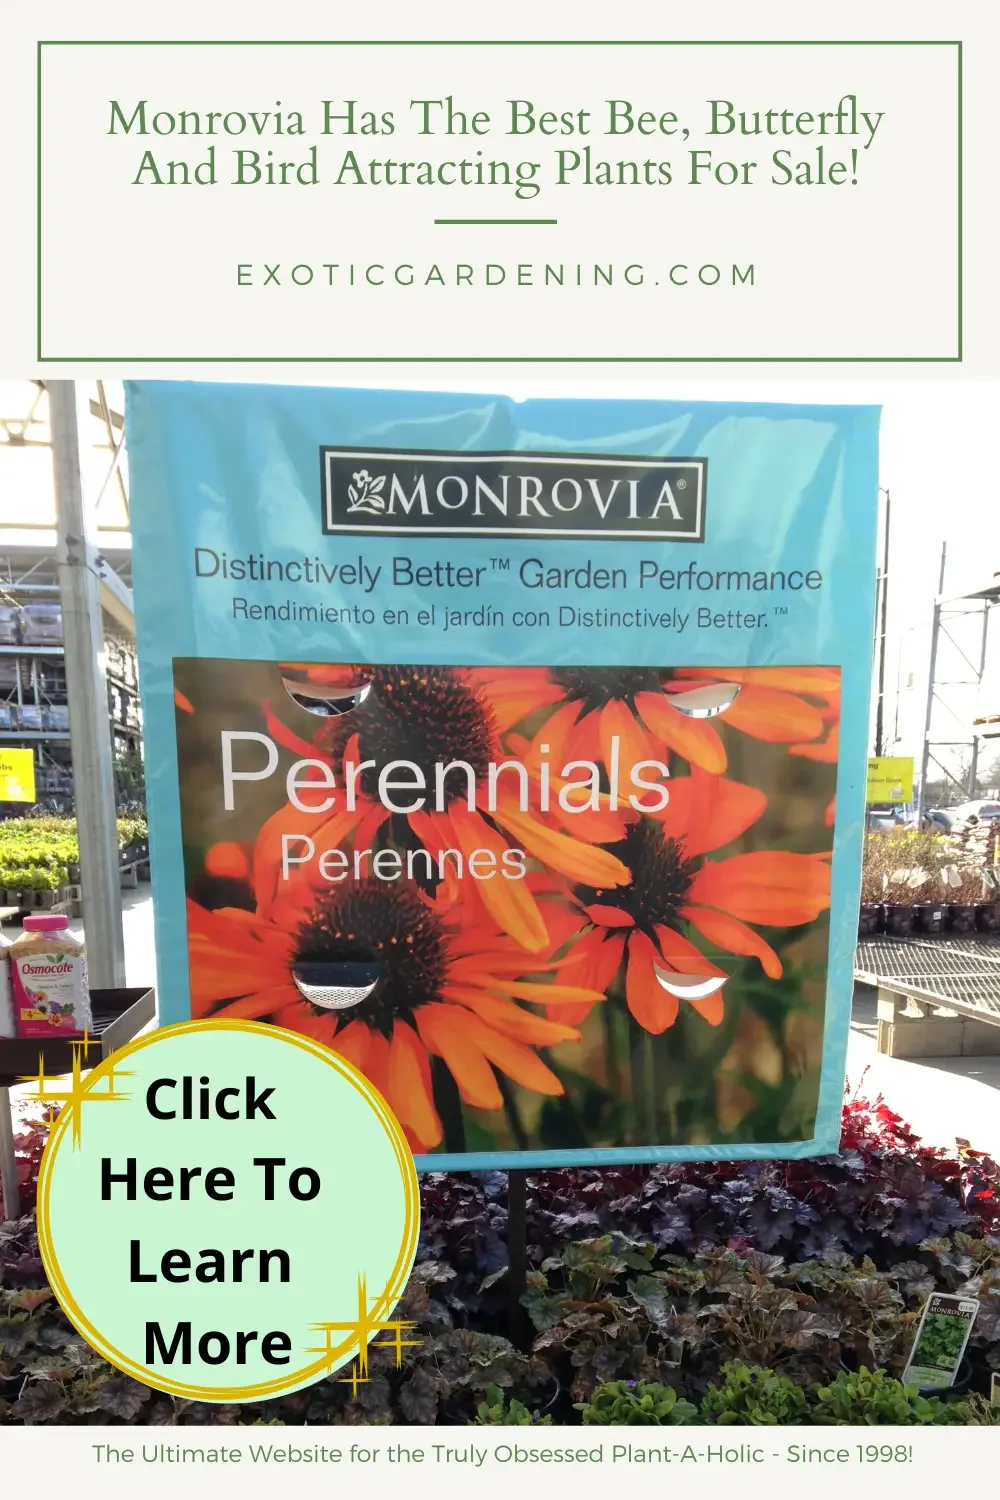 The Monrovia perennial display banner along with some perennial plants at Lowes.